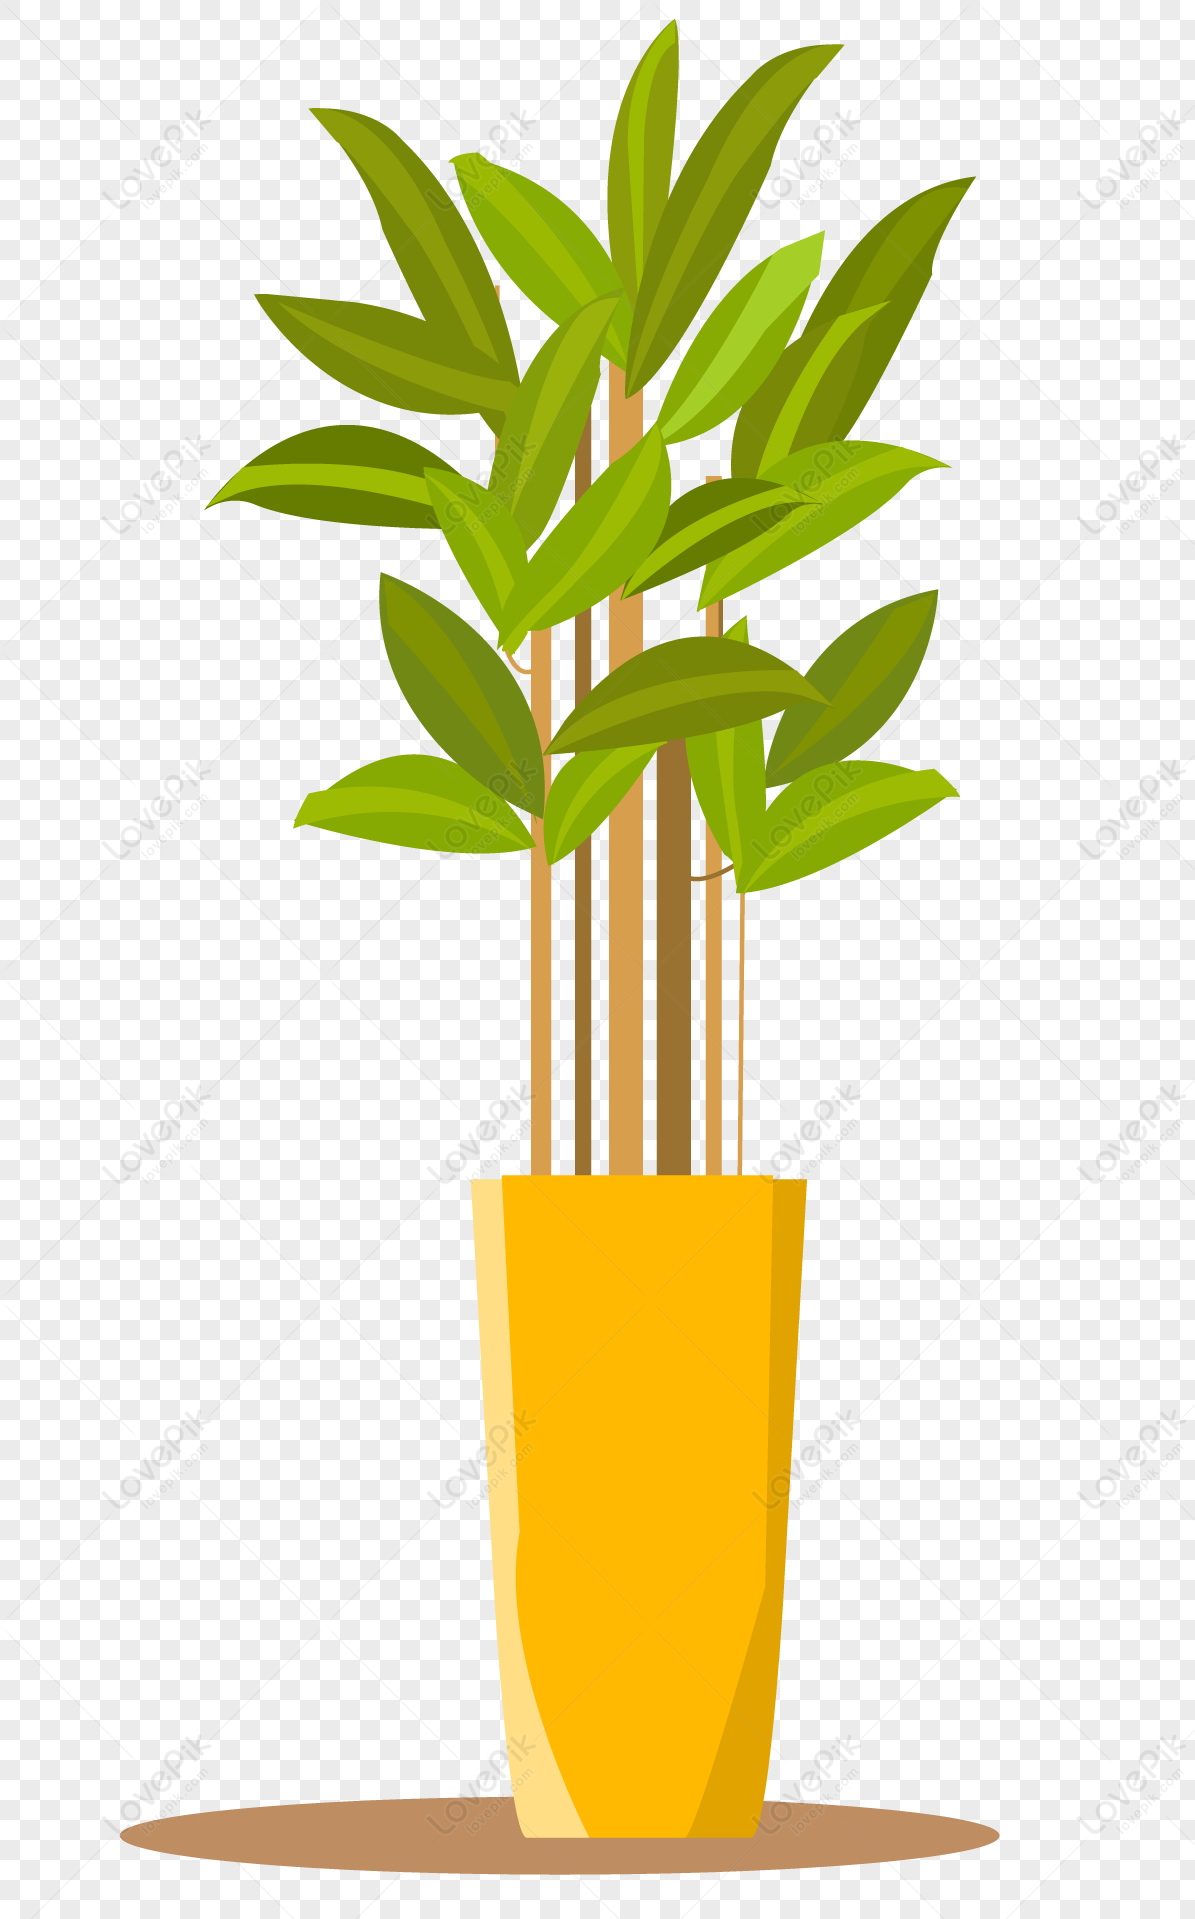 Pot Plant PNG Image Free Download And Clipart Image For Free Download -  Lovepik | 400243901